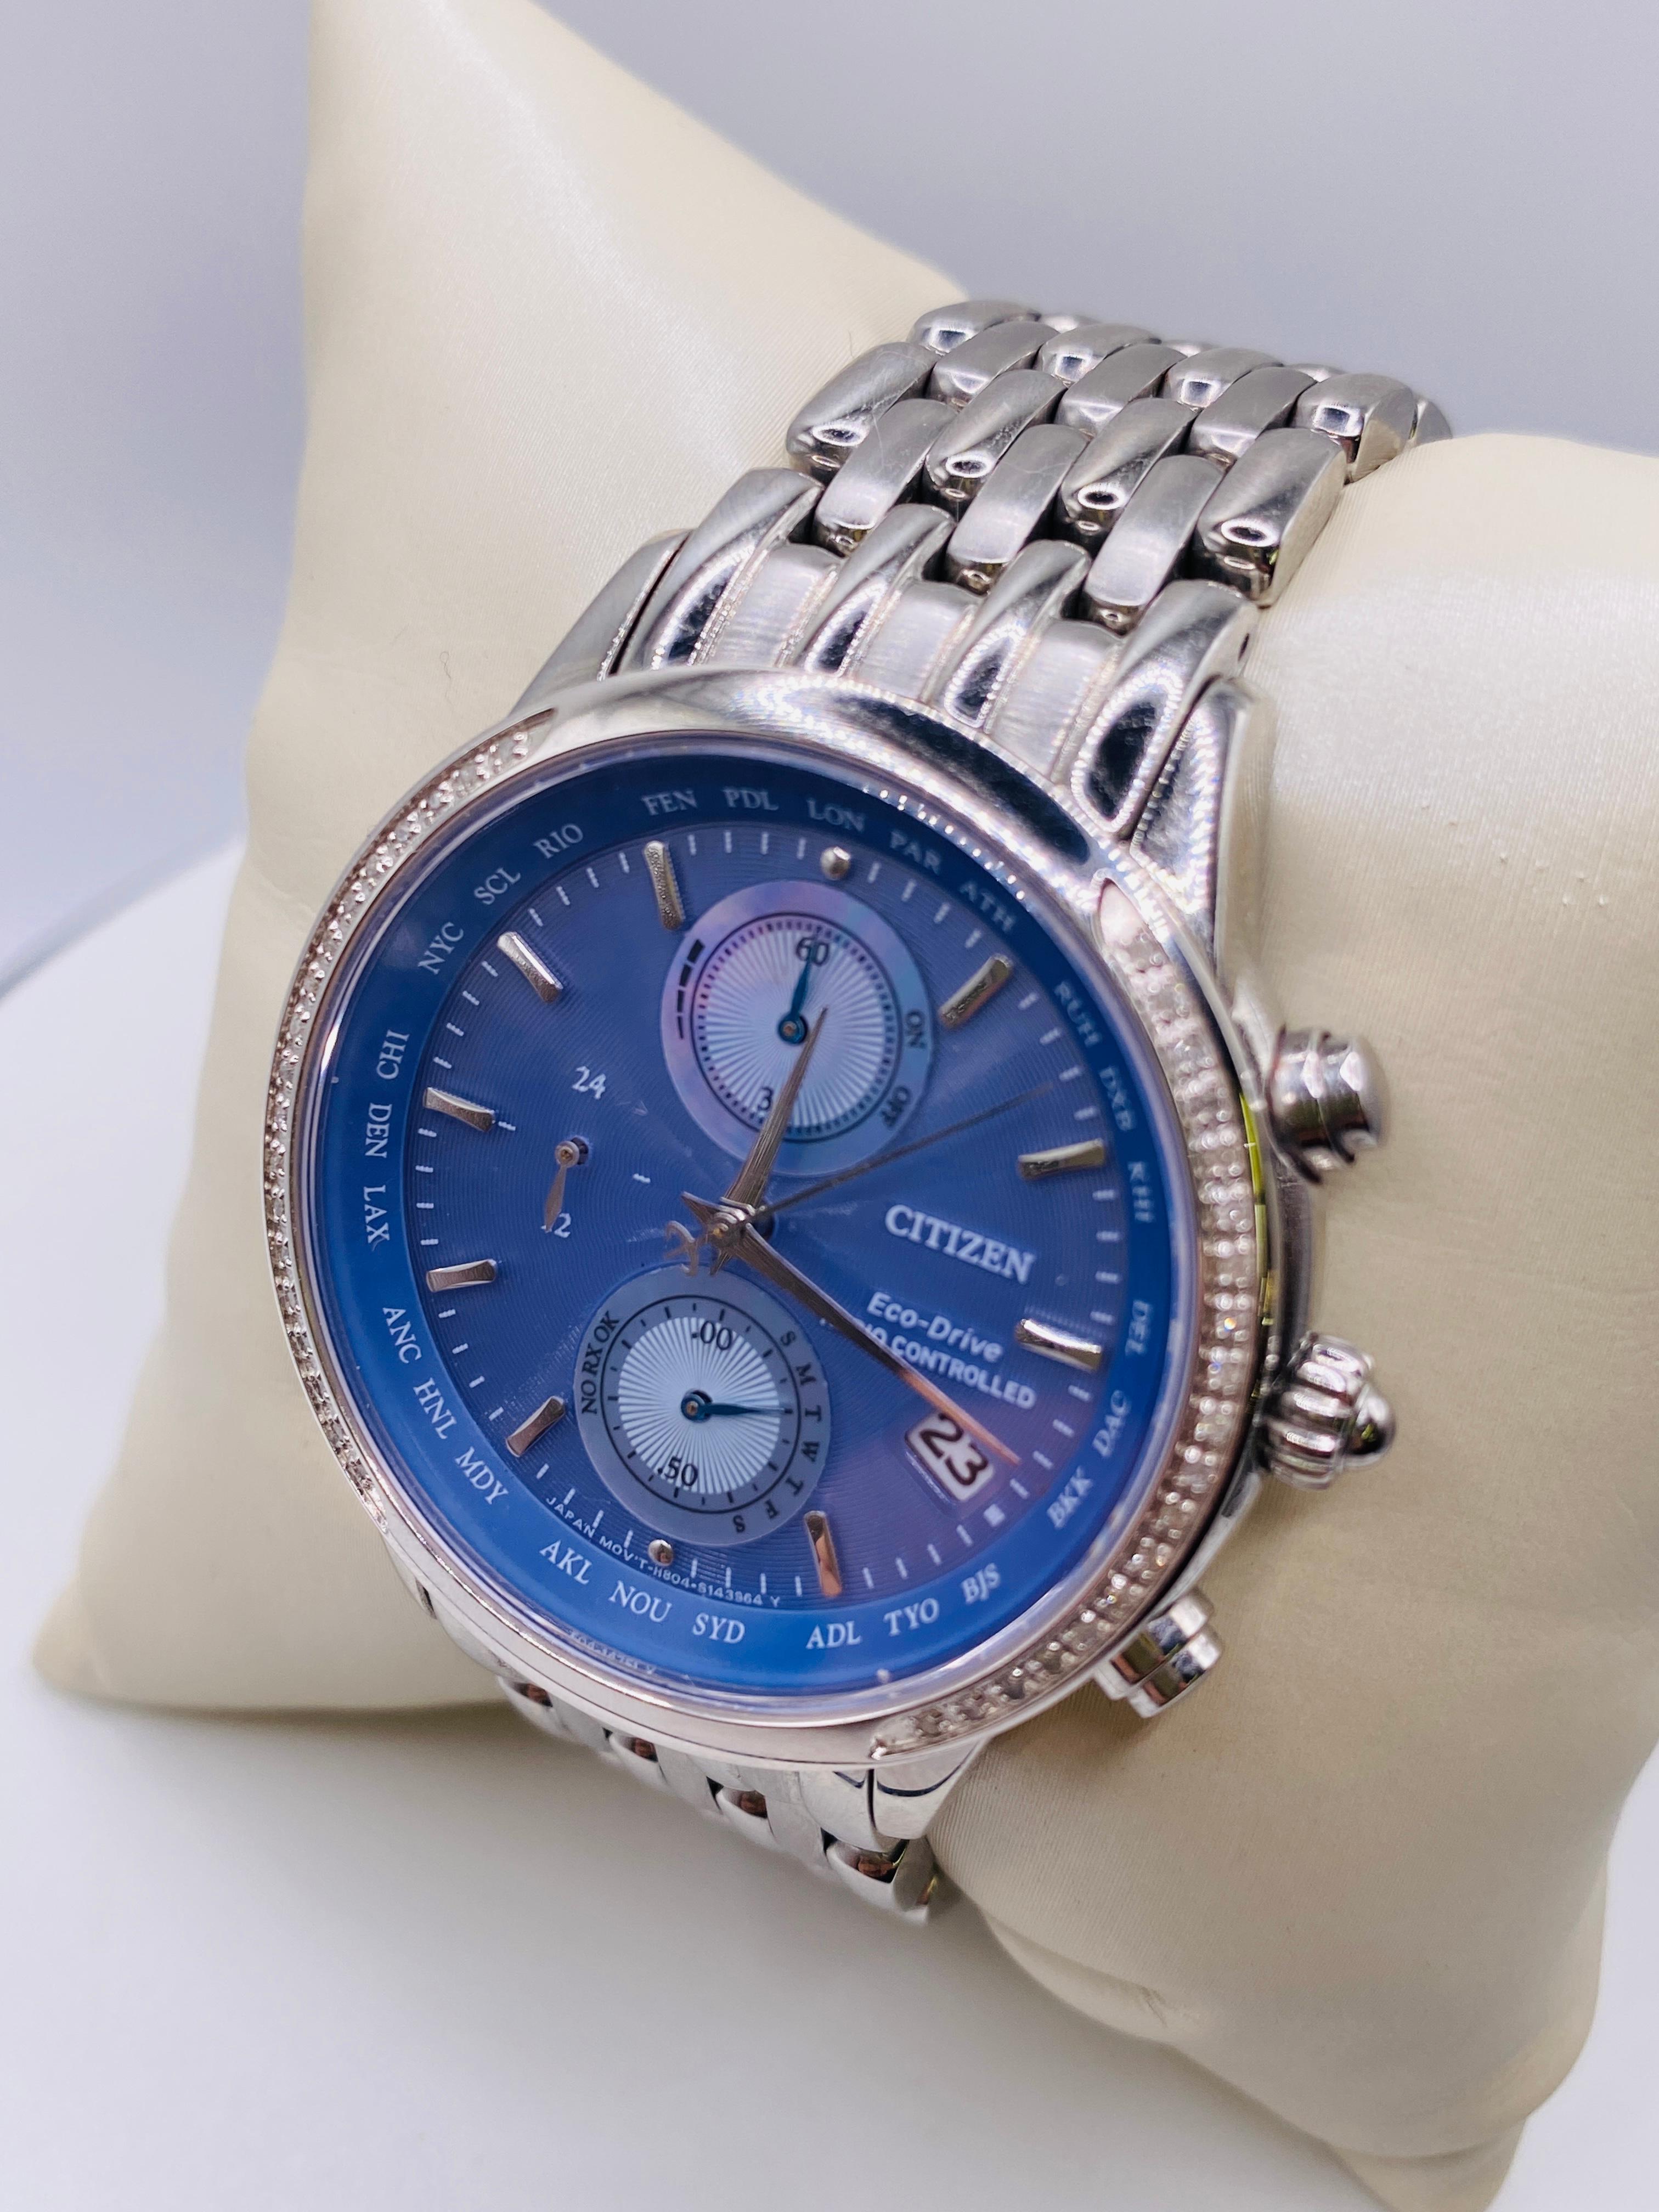 Citizen Eco Drive Radio Controlled Purple Dial Stainless Steel Watch. World chronograph A-T, 40 mm case, periwinkle blue dial, 26 time zones, solar powered, sapphire crystal, movement made in Japan. Model H804-S103614, Serial 591020538.